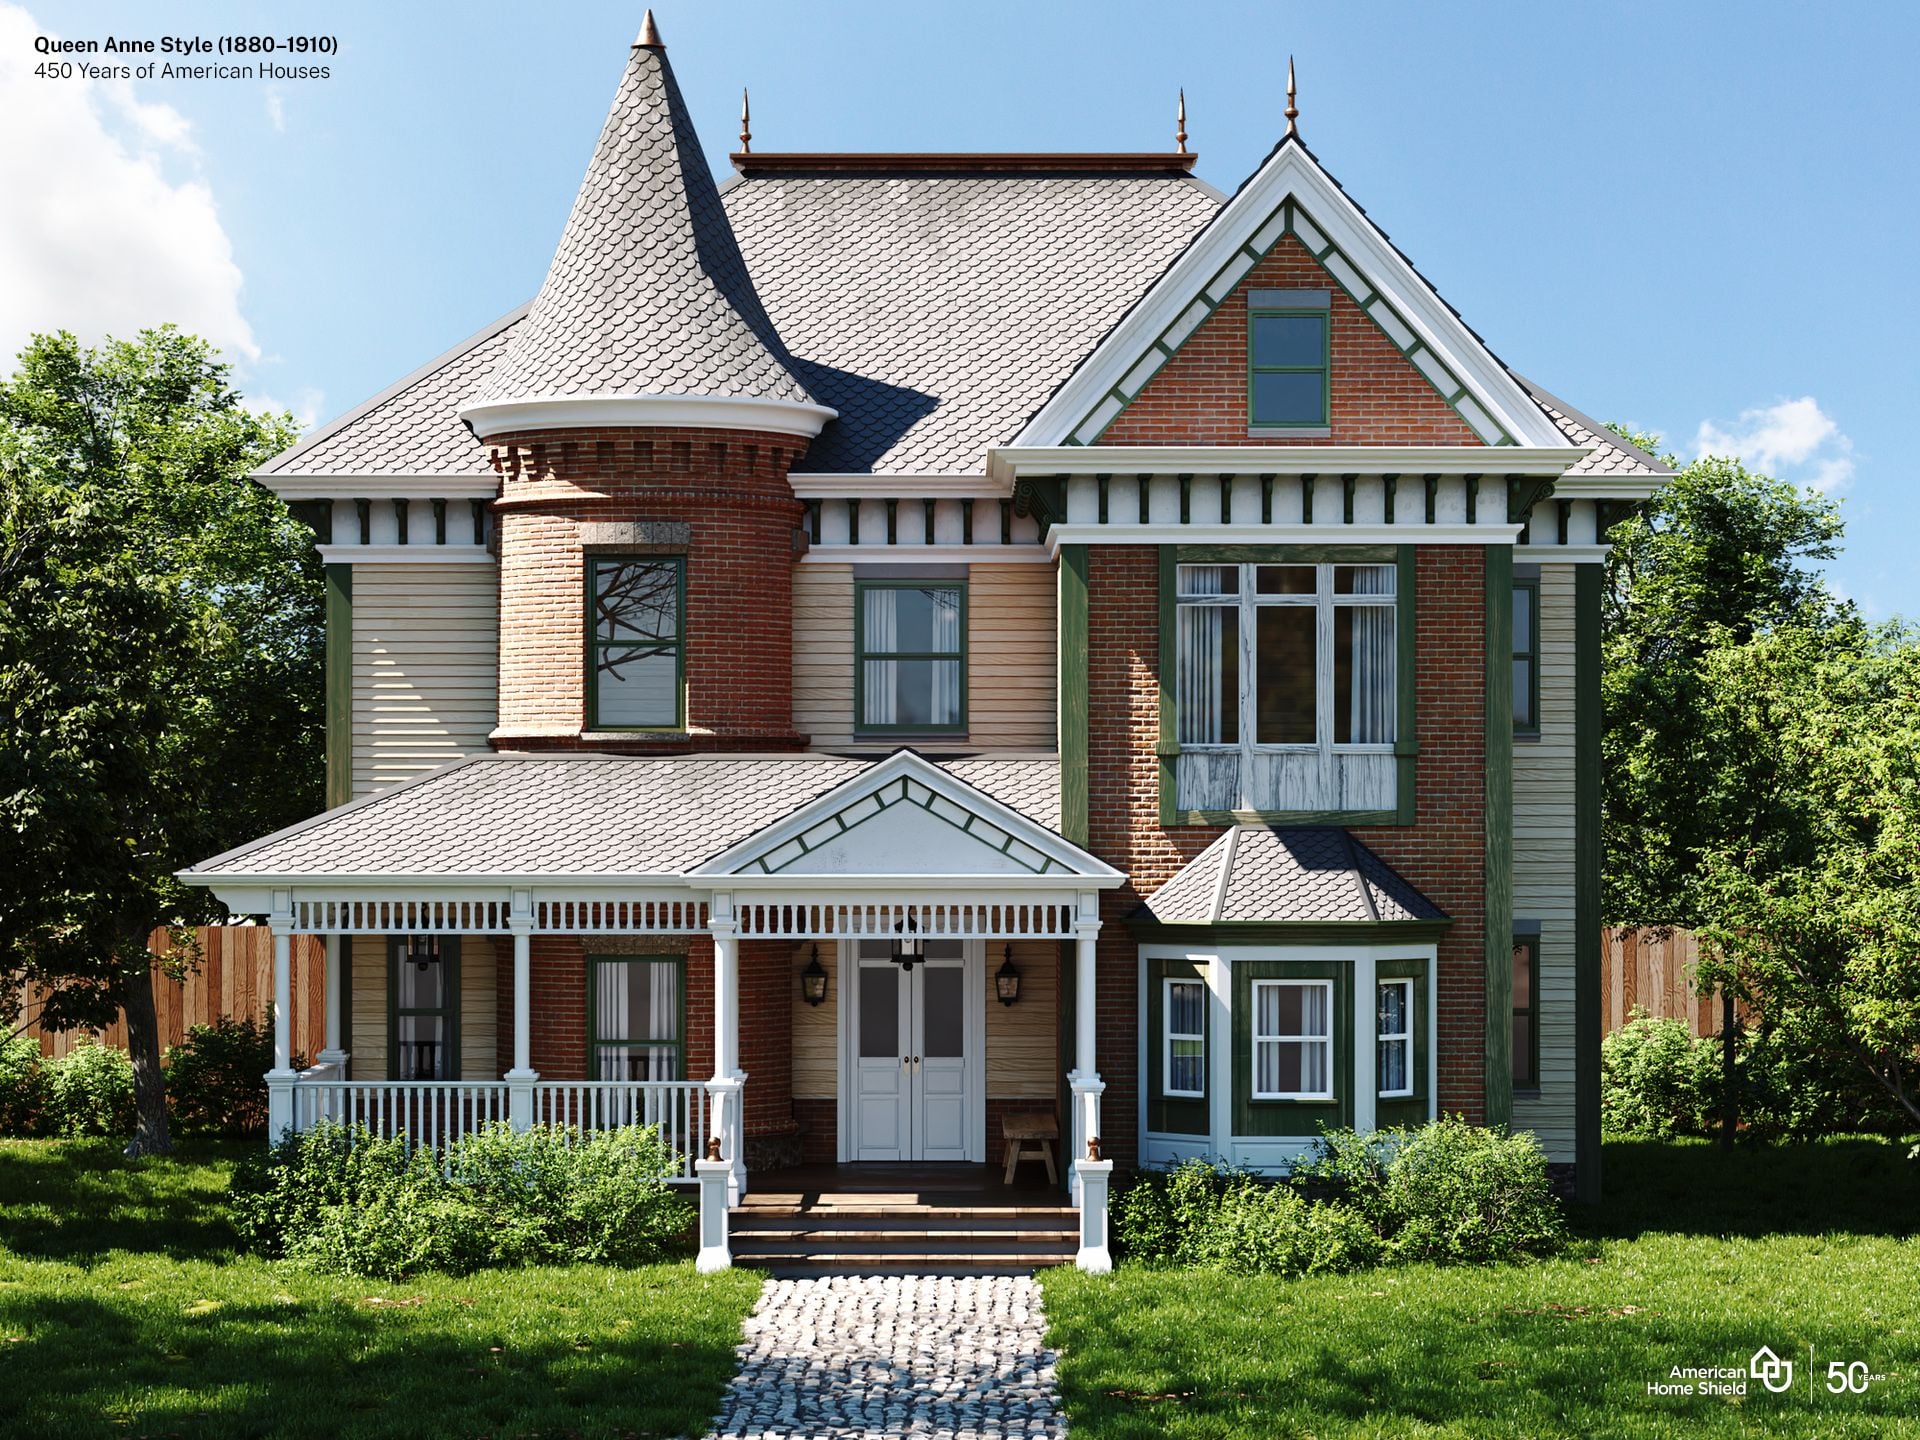 American Home Shield's re-creation of a Queen Anne-style home, popular from the 1880 to 1910..